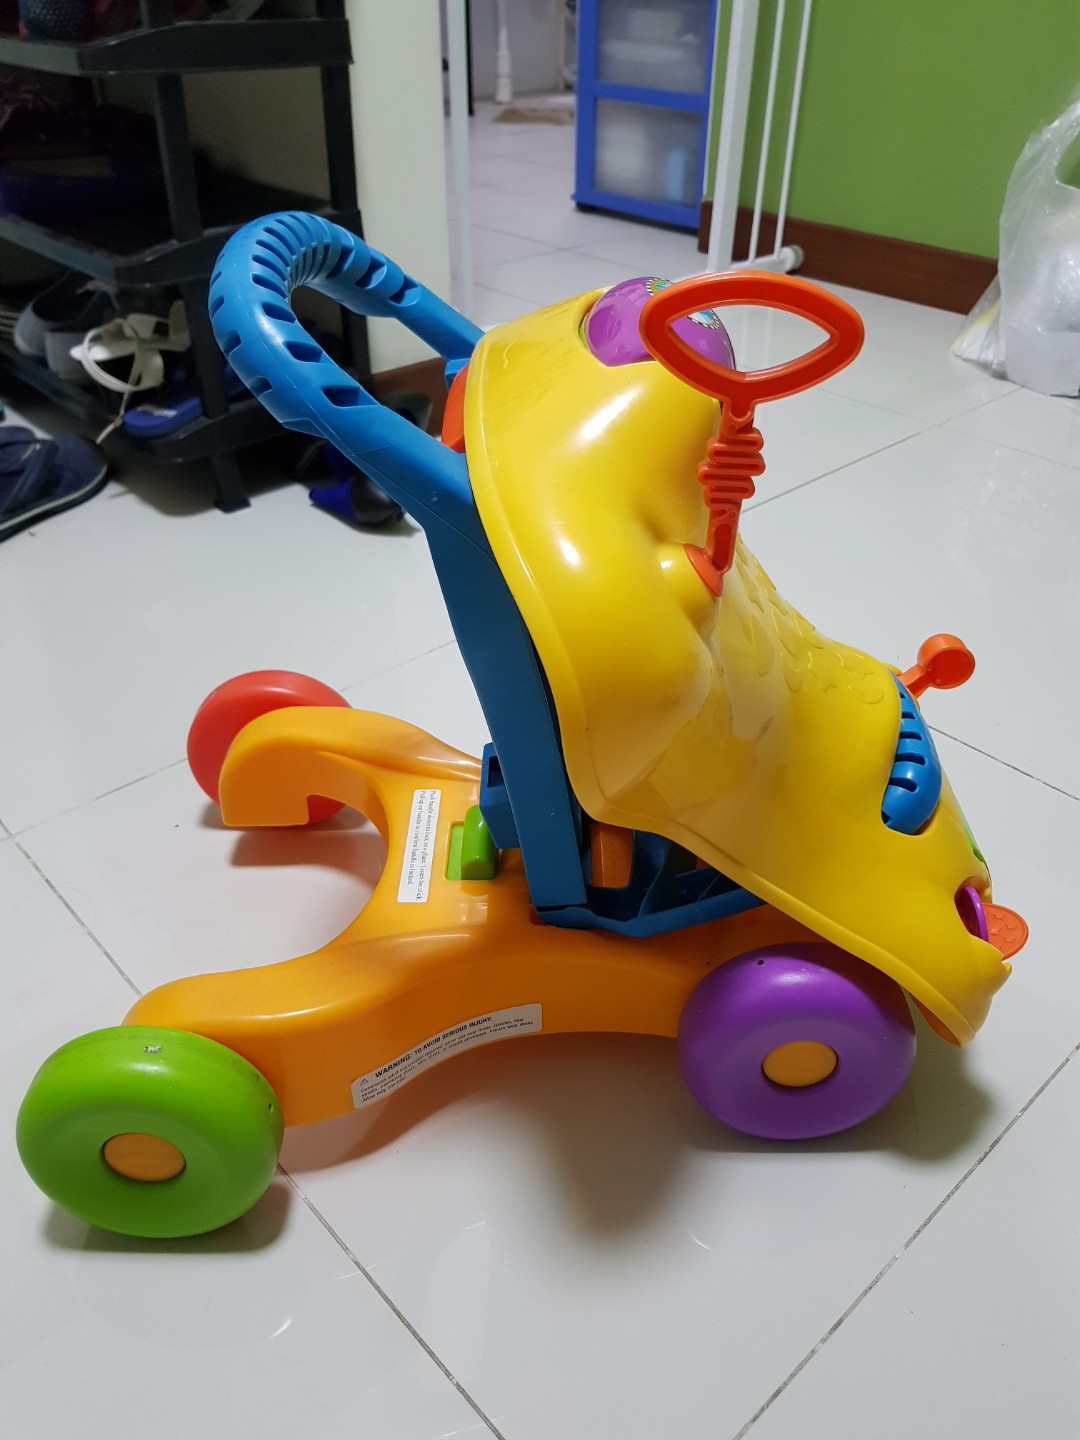 2nd hand toys for sale